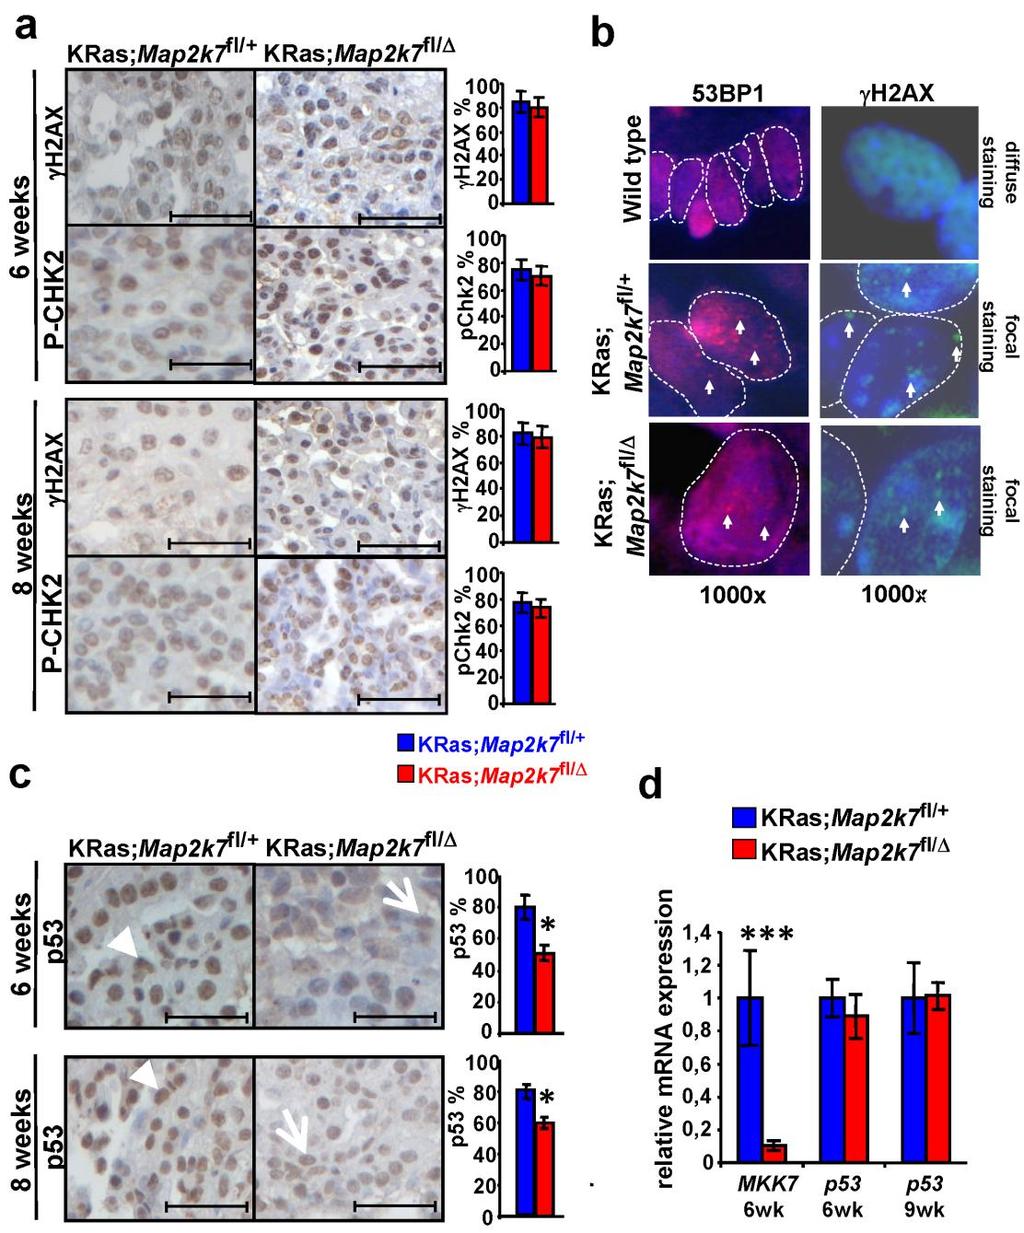 Supplementary Figure 7. DNA damage and p53 mrna espression in KRas V12D -driven lung tumors.